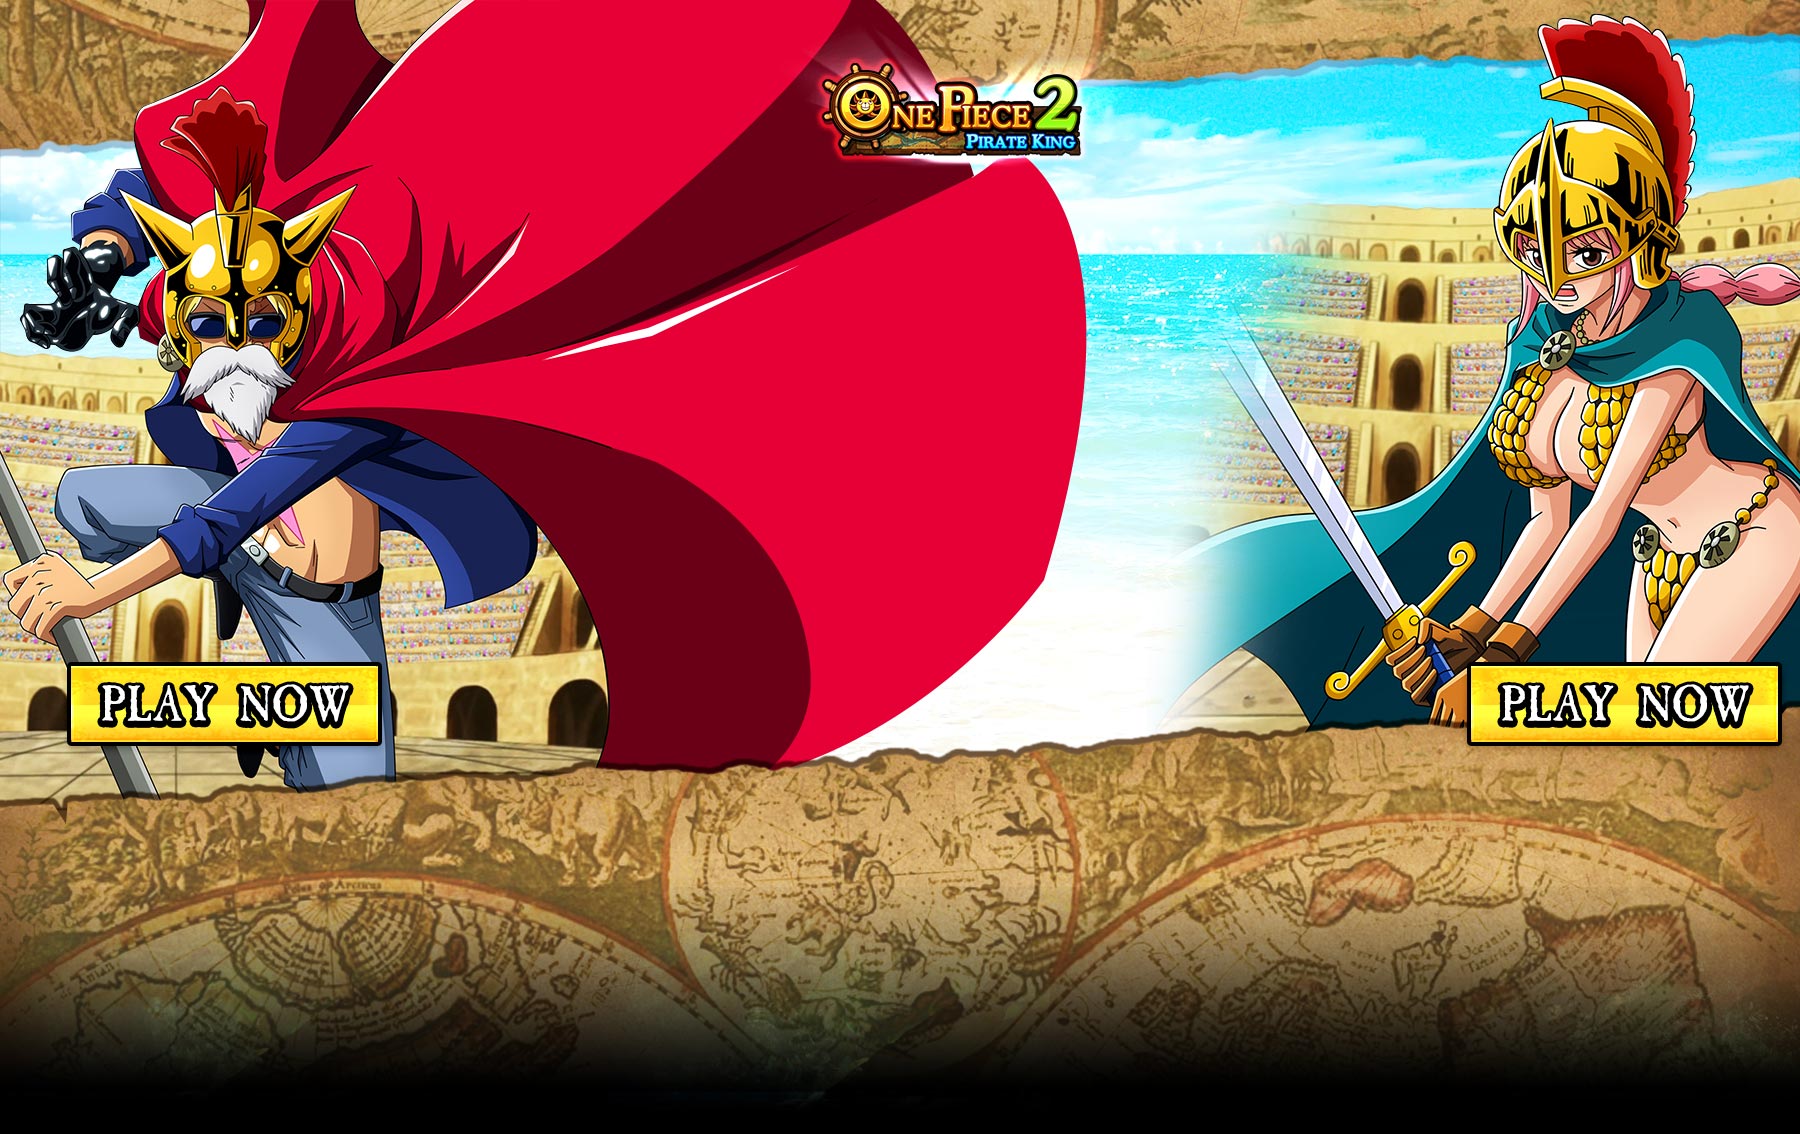 One Piece Online 2: Pirate King